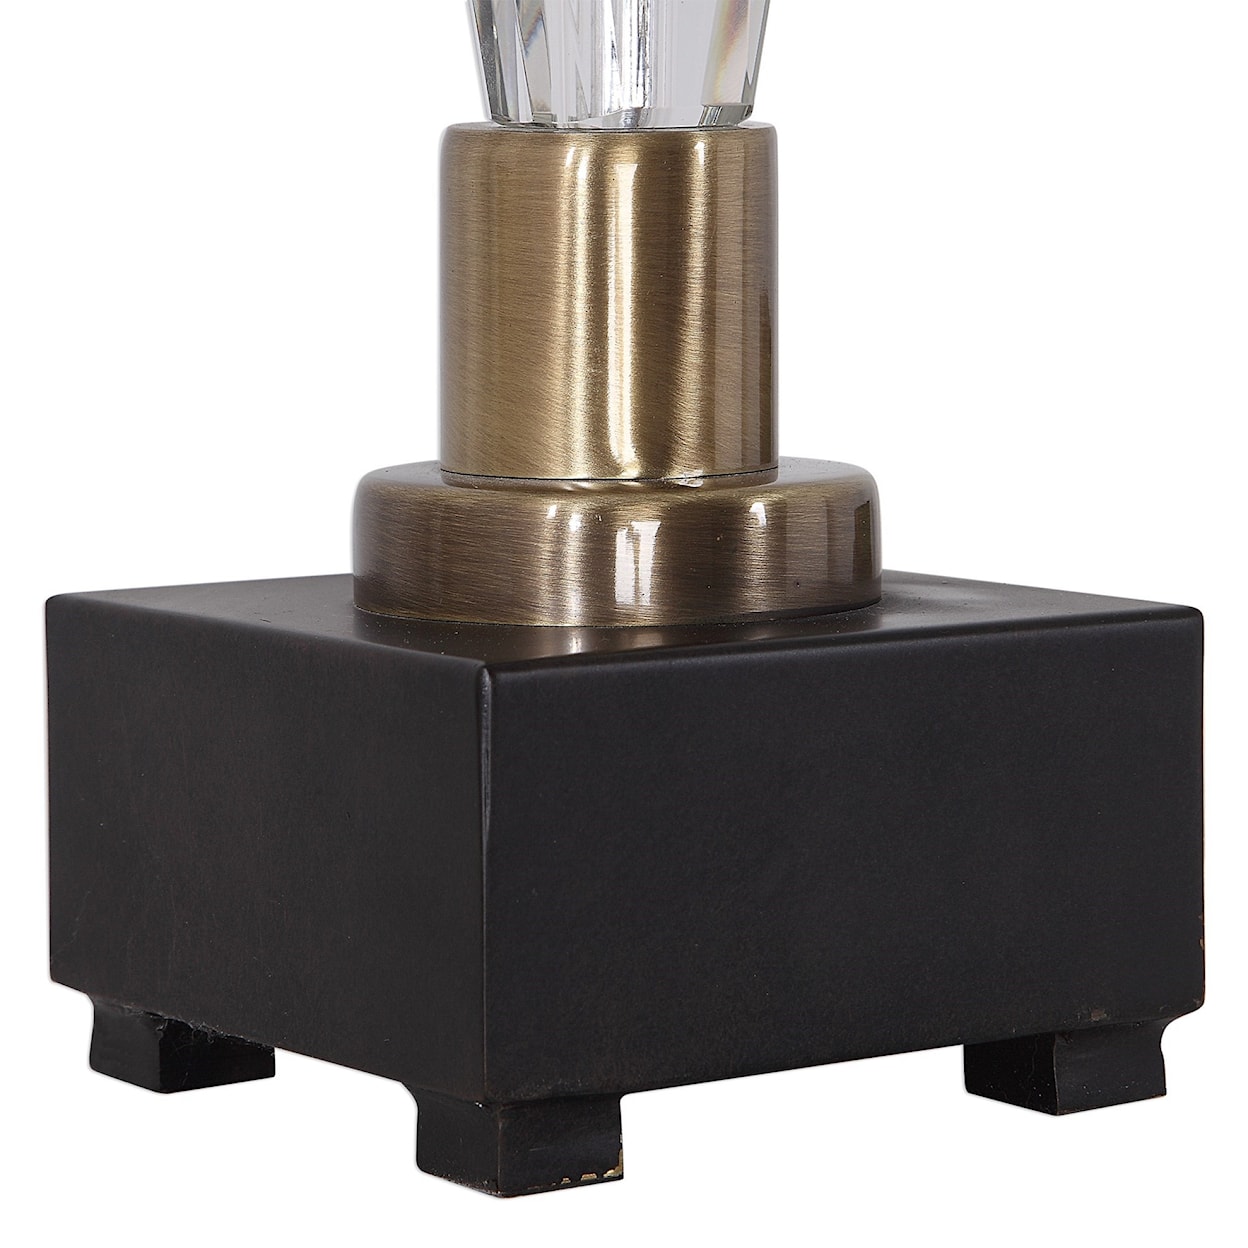 Uttermost Table Lamps Cora Geometric Crystal Table Lamp